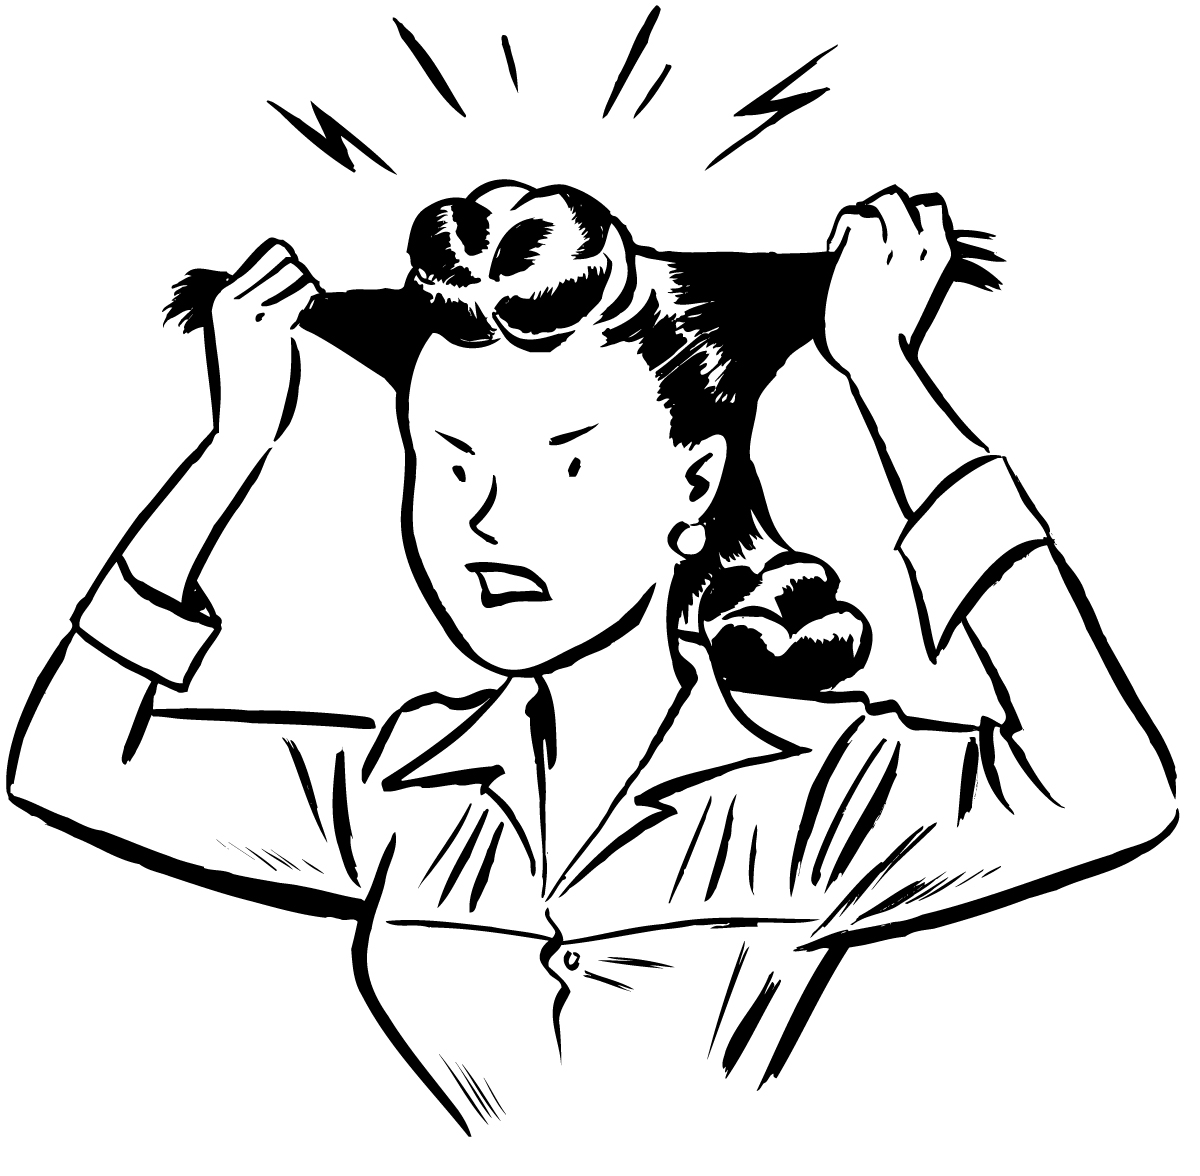 Pics Of Stressed Out People - Clipart library